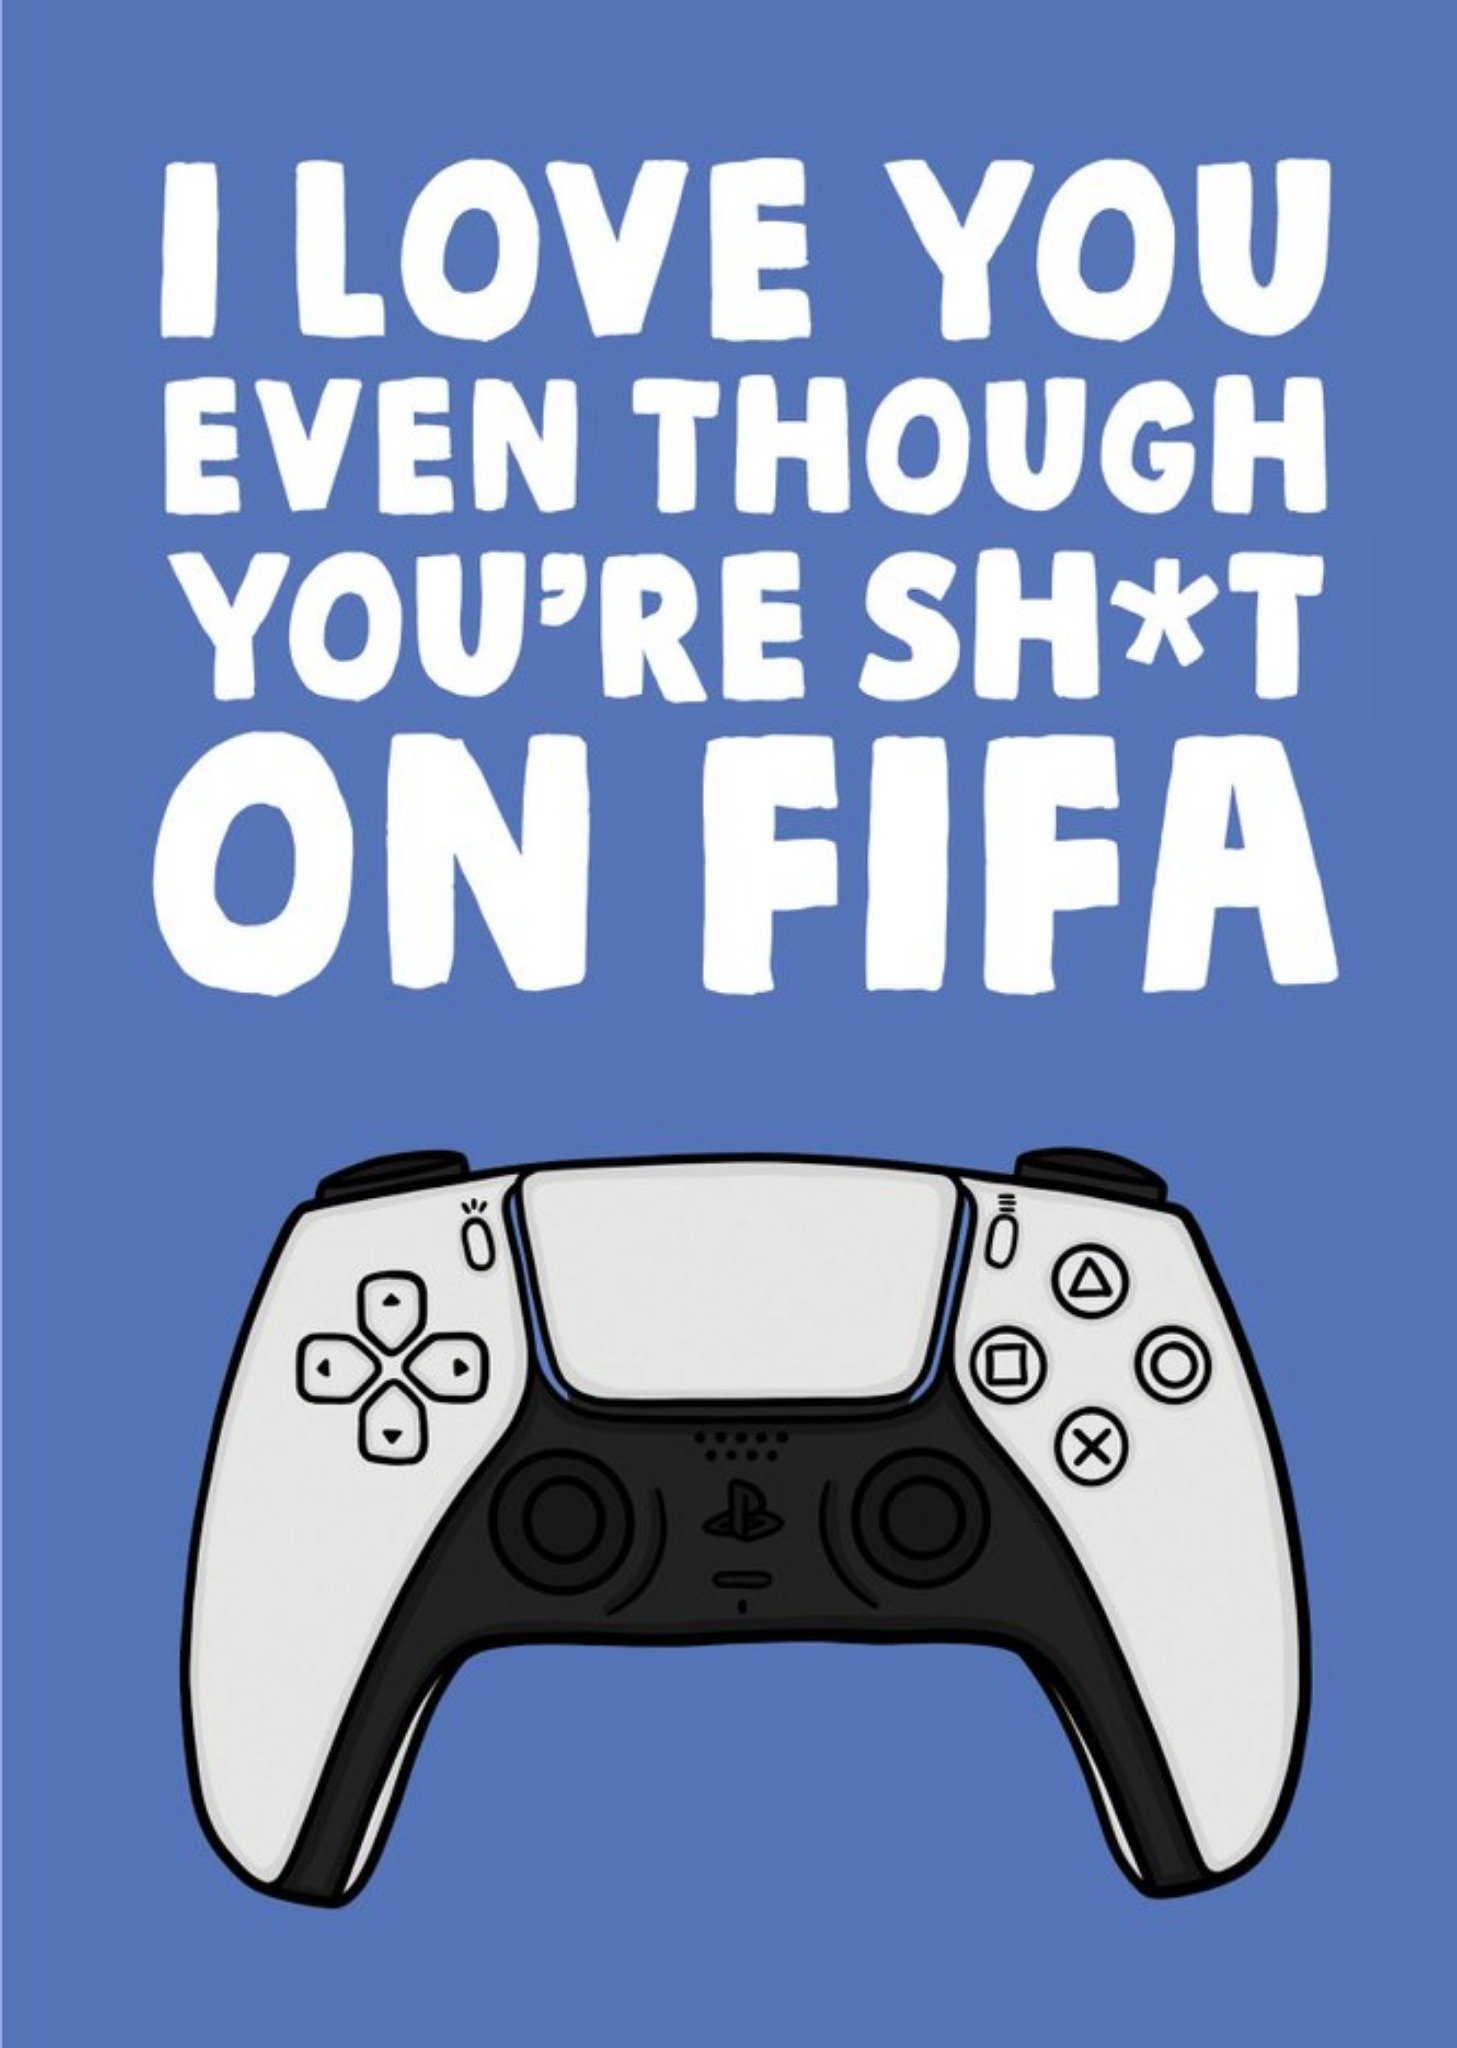 Moonpig Even Though You're Sh*t On Fifa Card Ecard